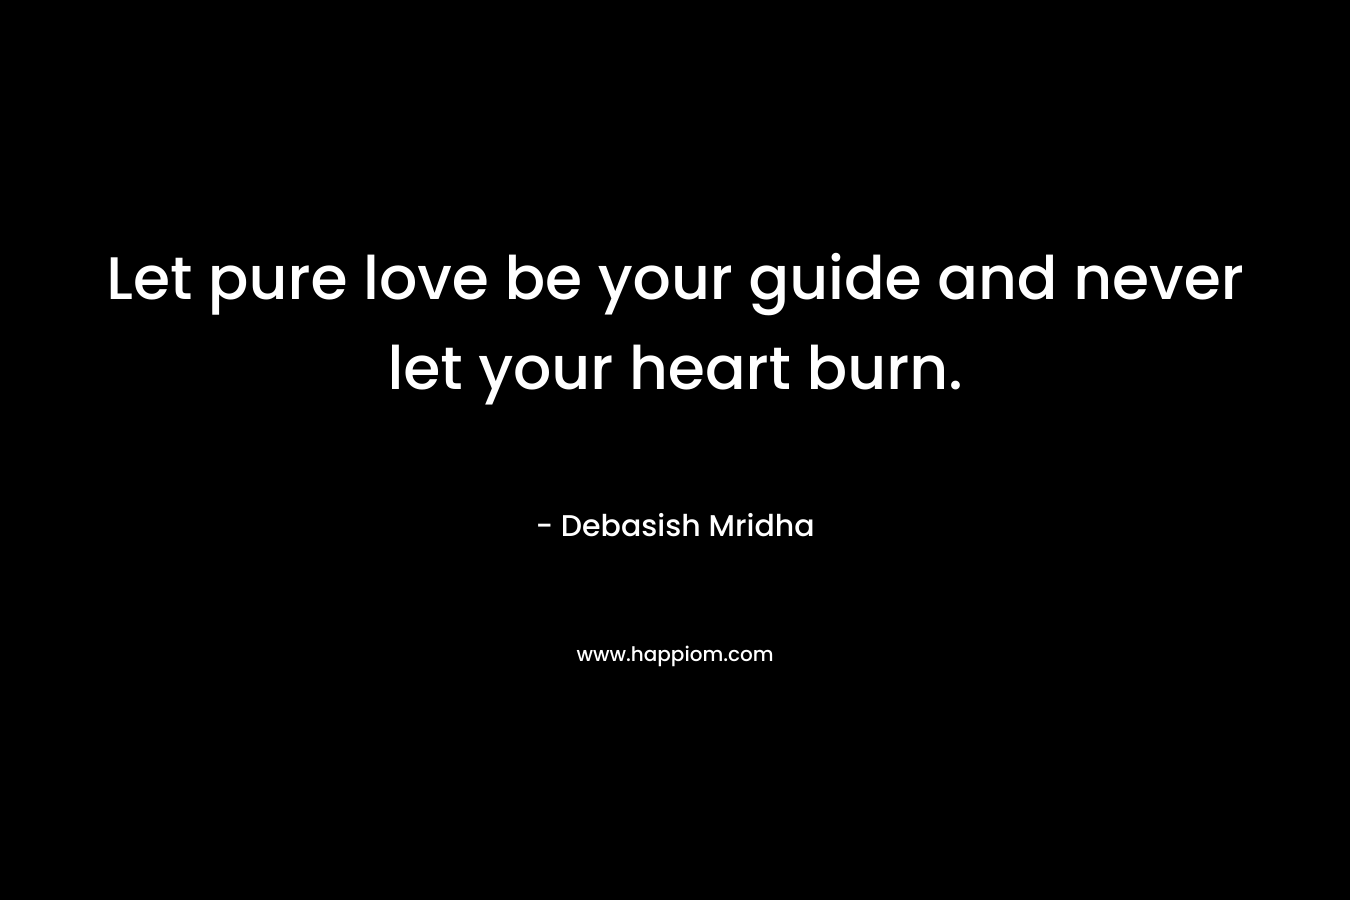 Let pure love be your guide and never let your heart burn.